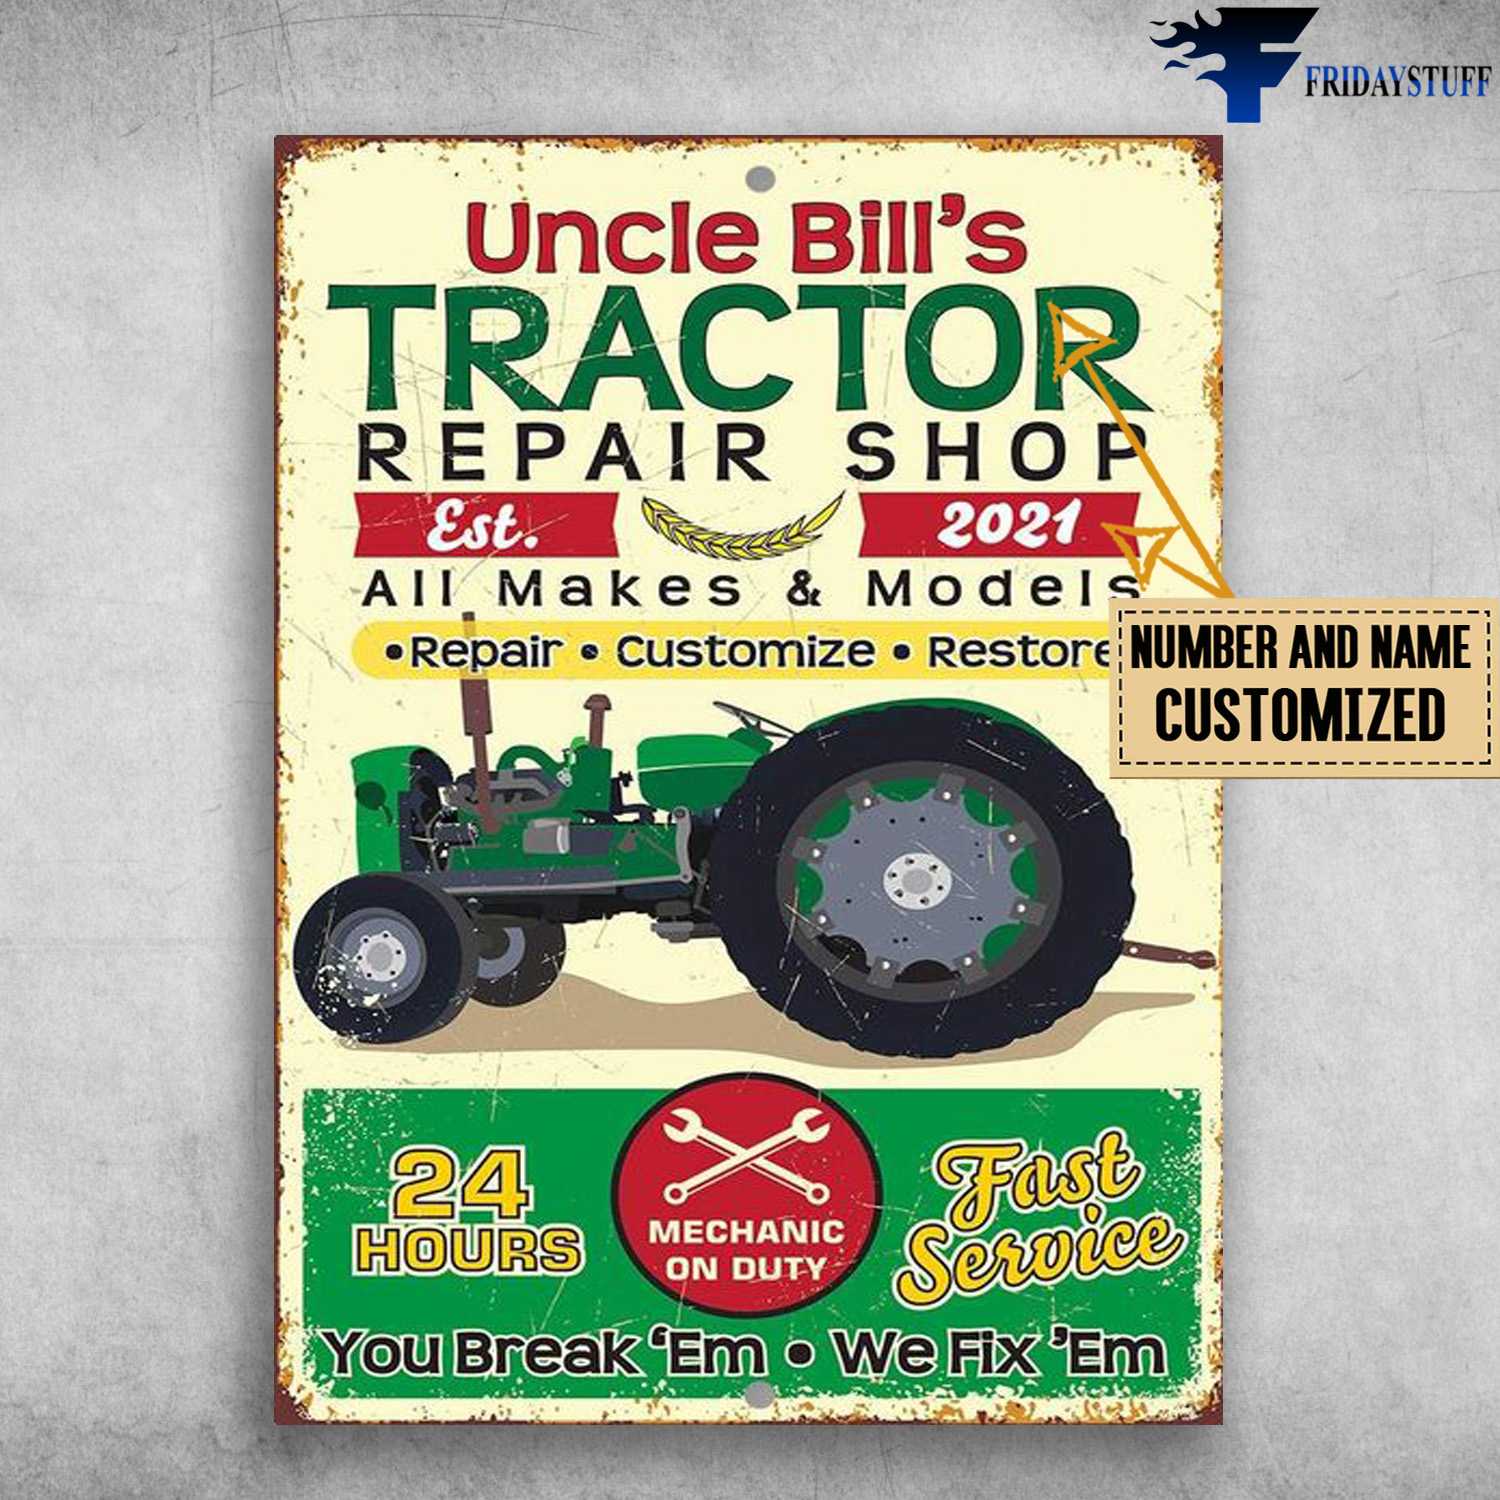 Farmer Poster, Tractor Repair Shop, All Makes And Models, Fast Service